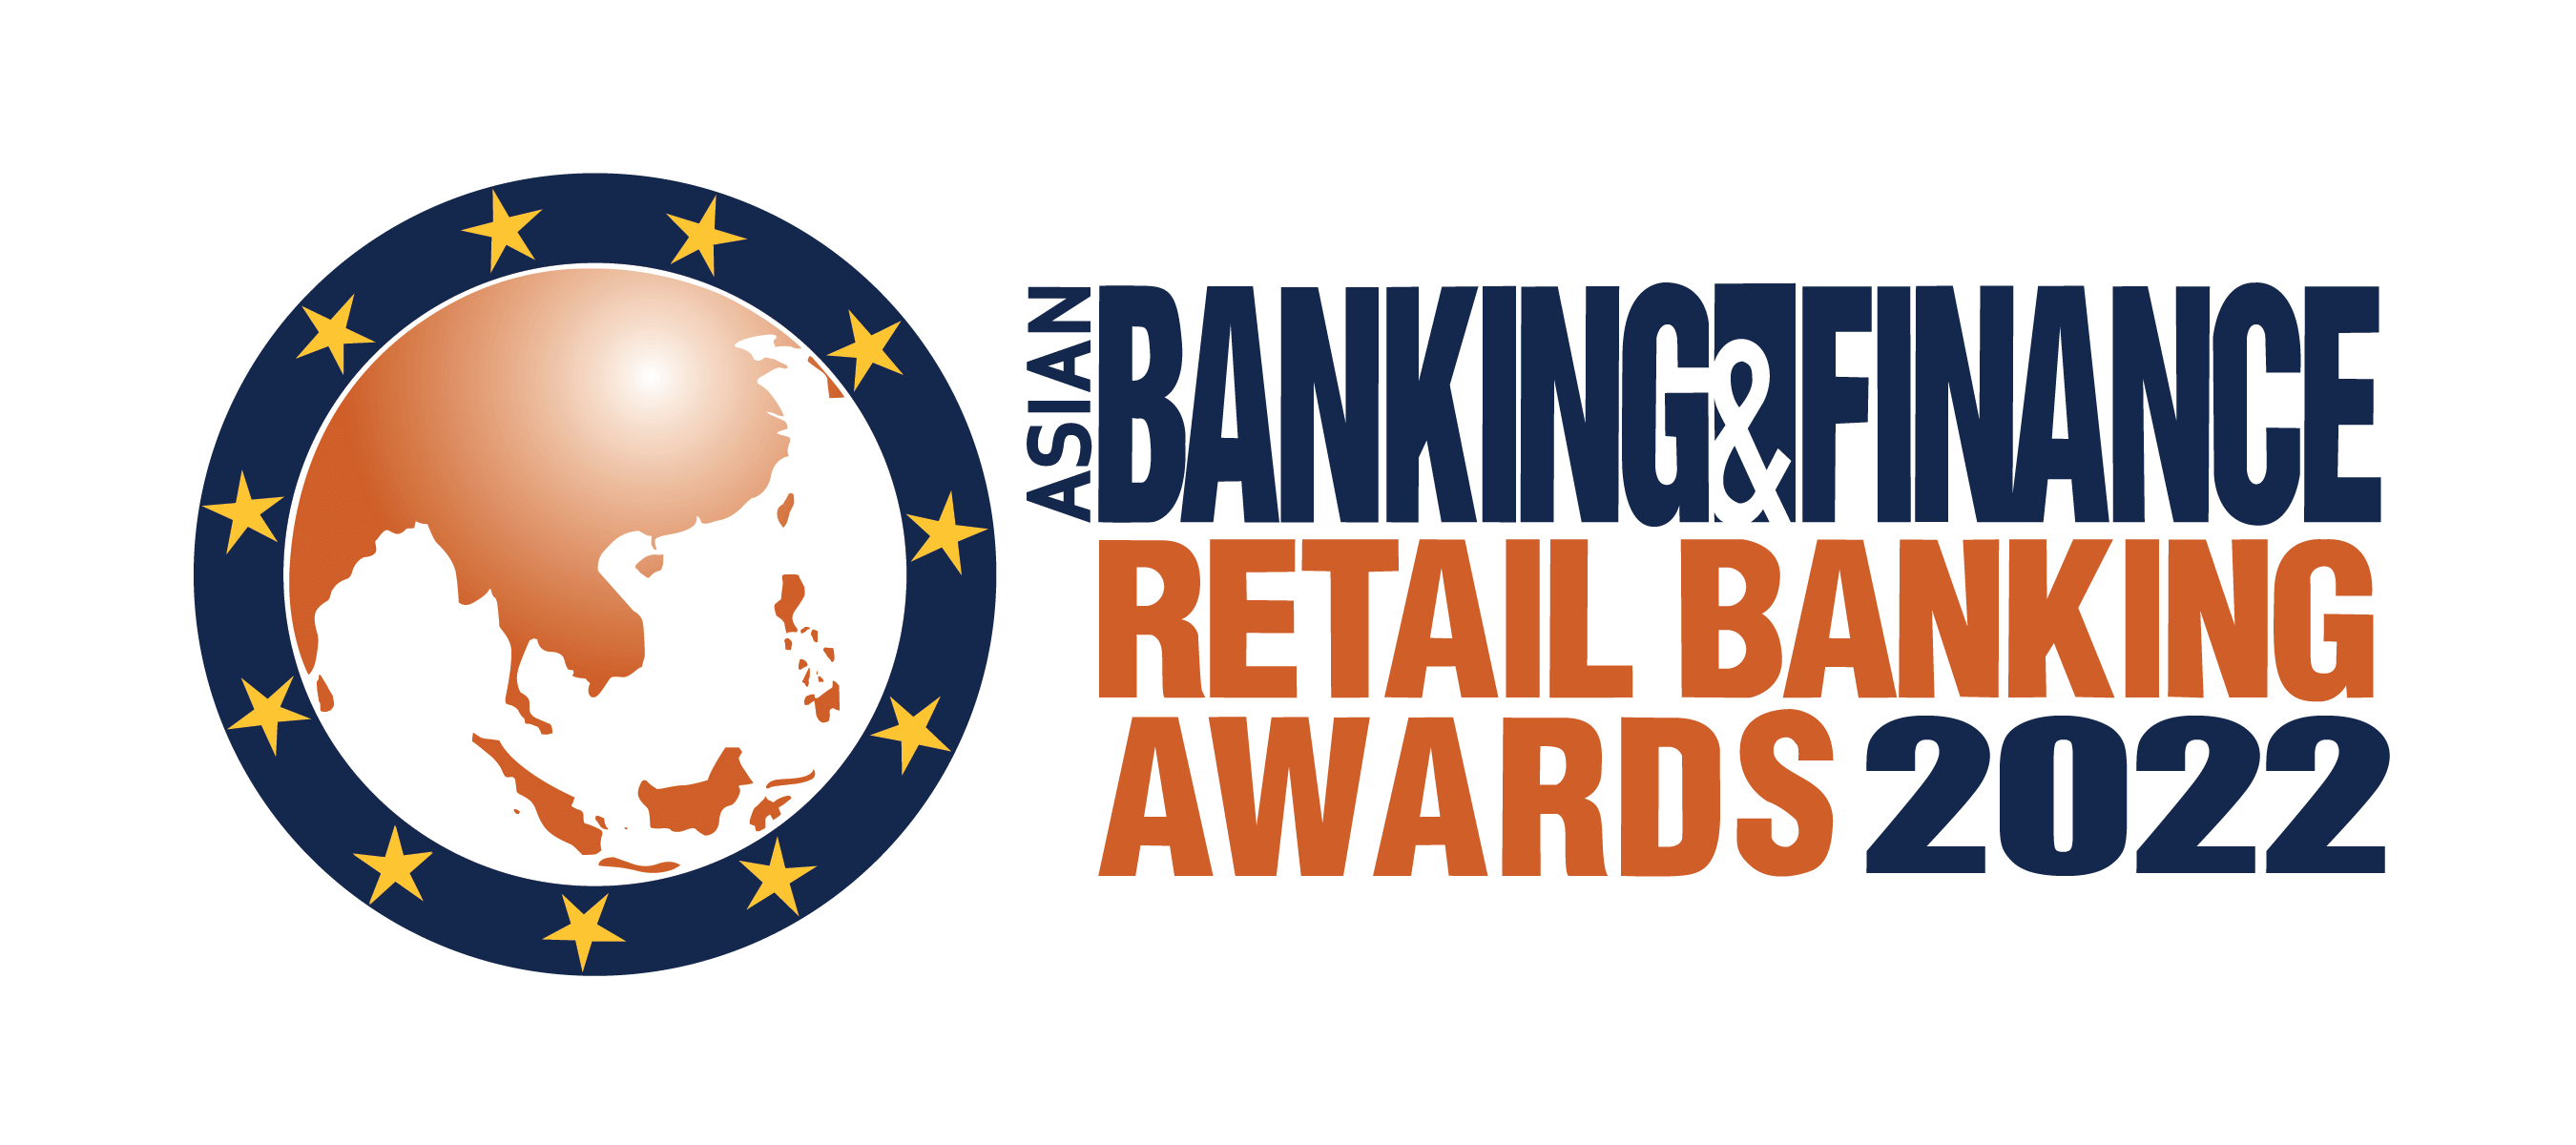 Mobile Banking & Payment Initiative of the Year